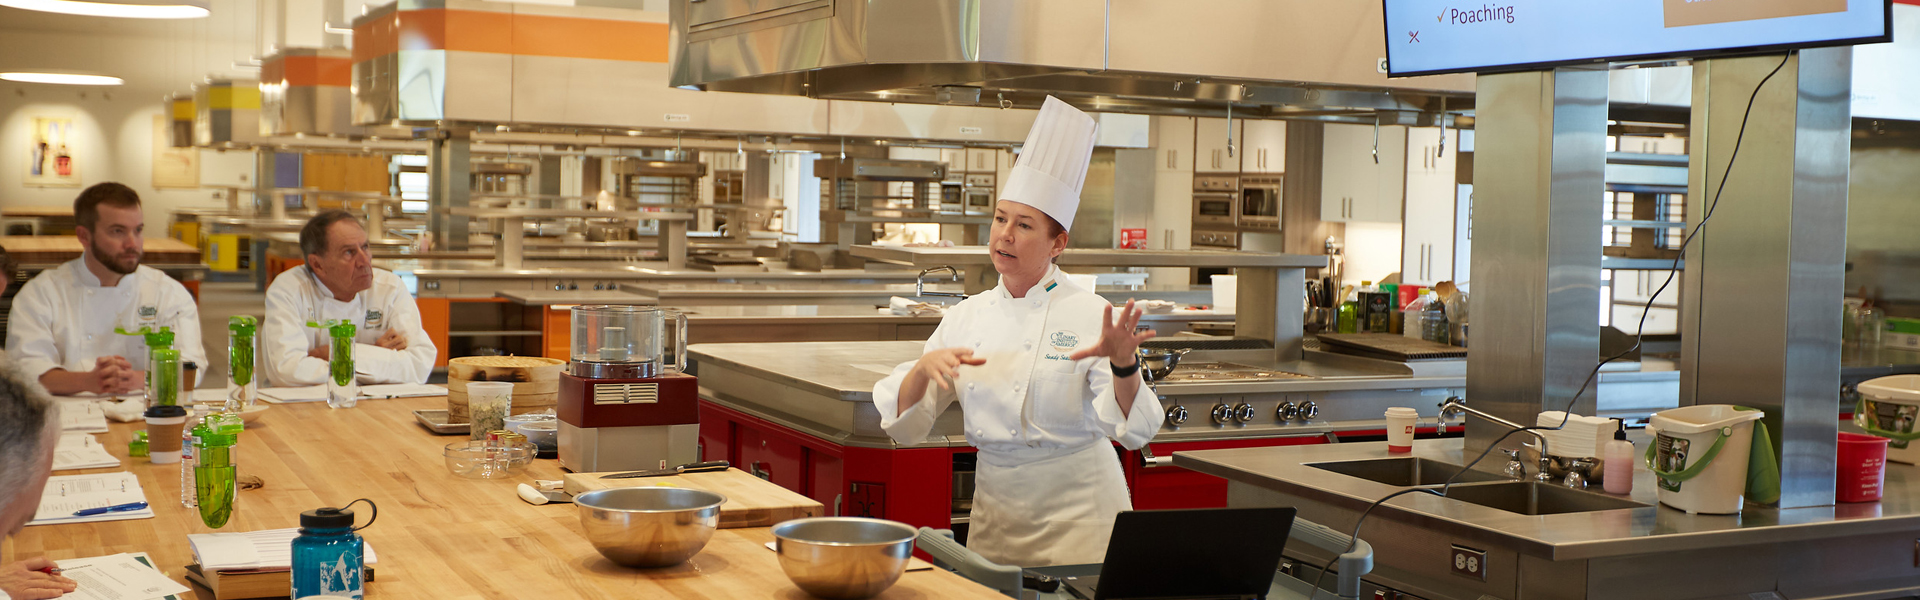 Cook Like a Pro with CIA Classes at The CIA at Copia in Napa, CA